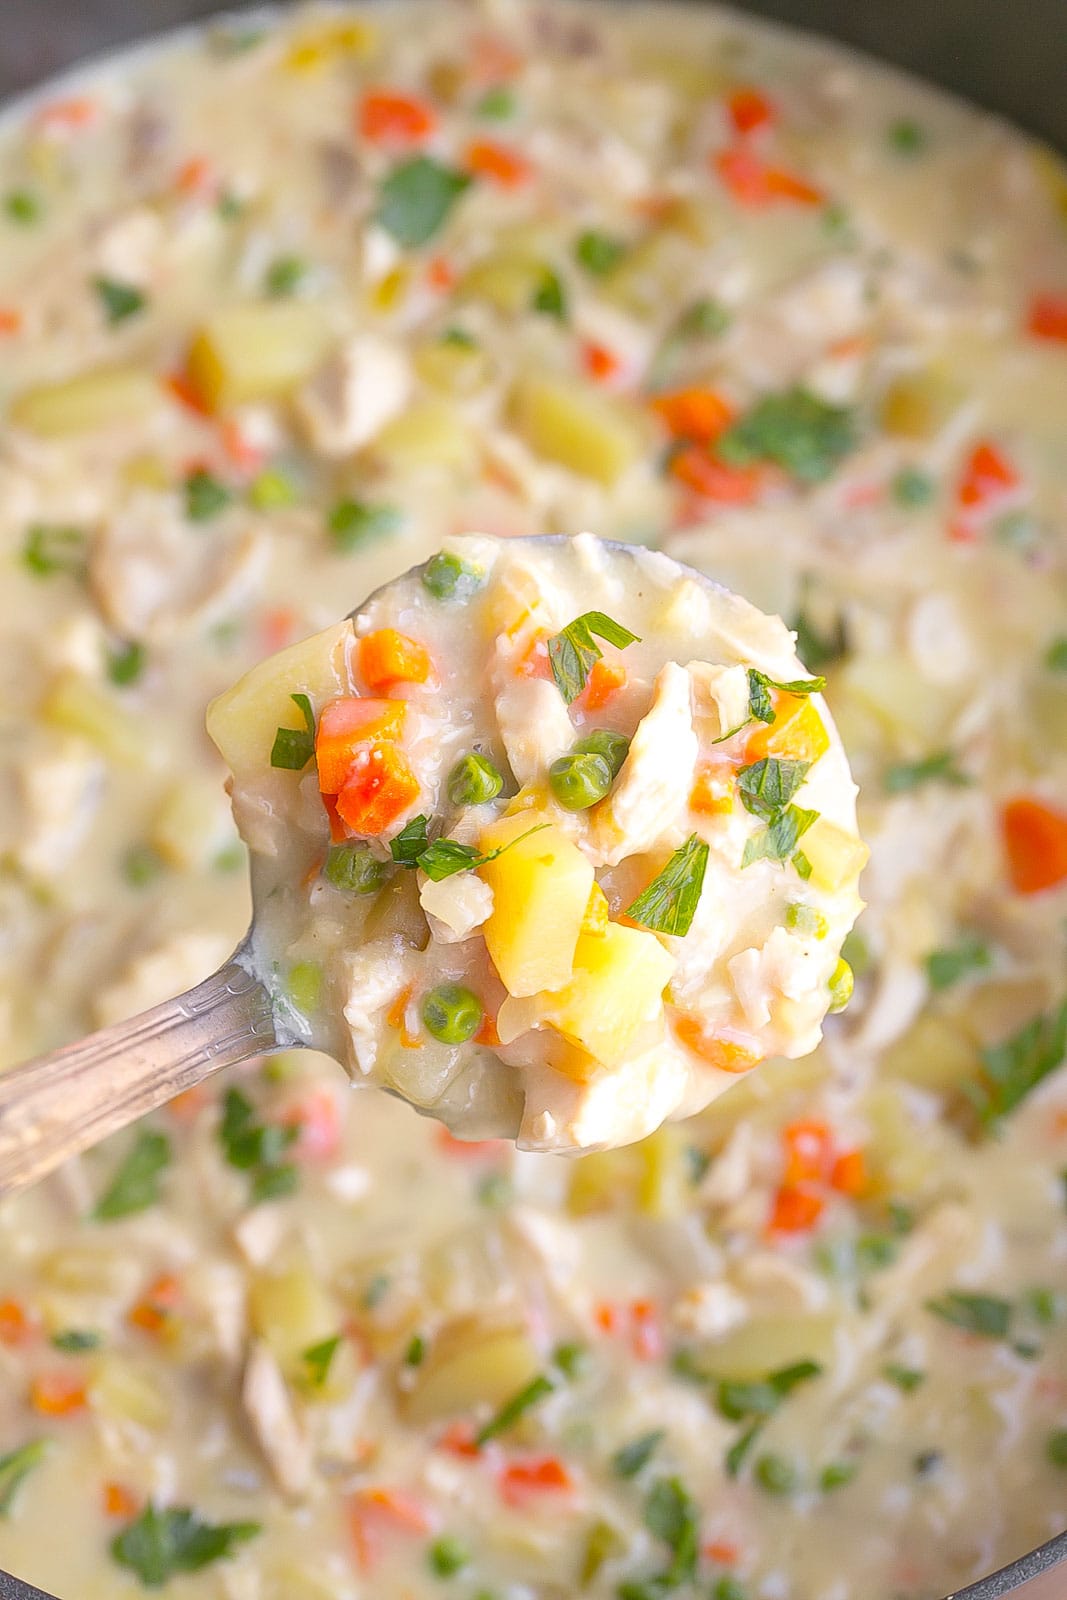 Spoonful of creamy soup.